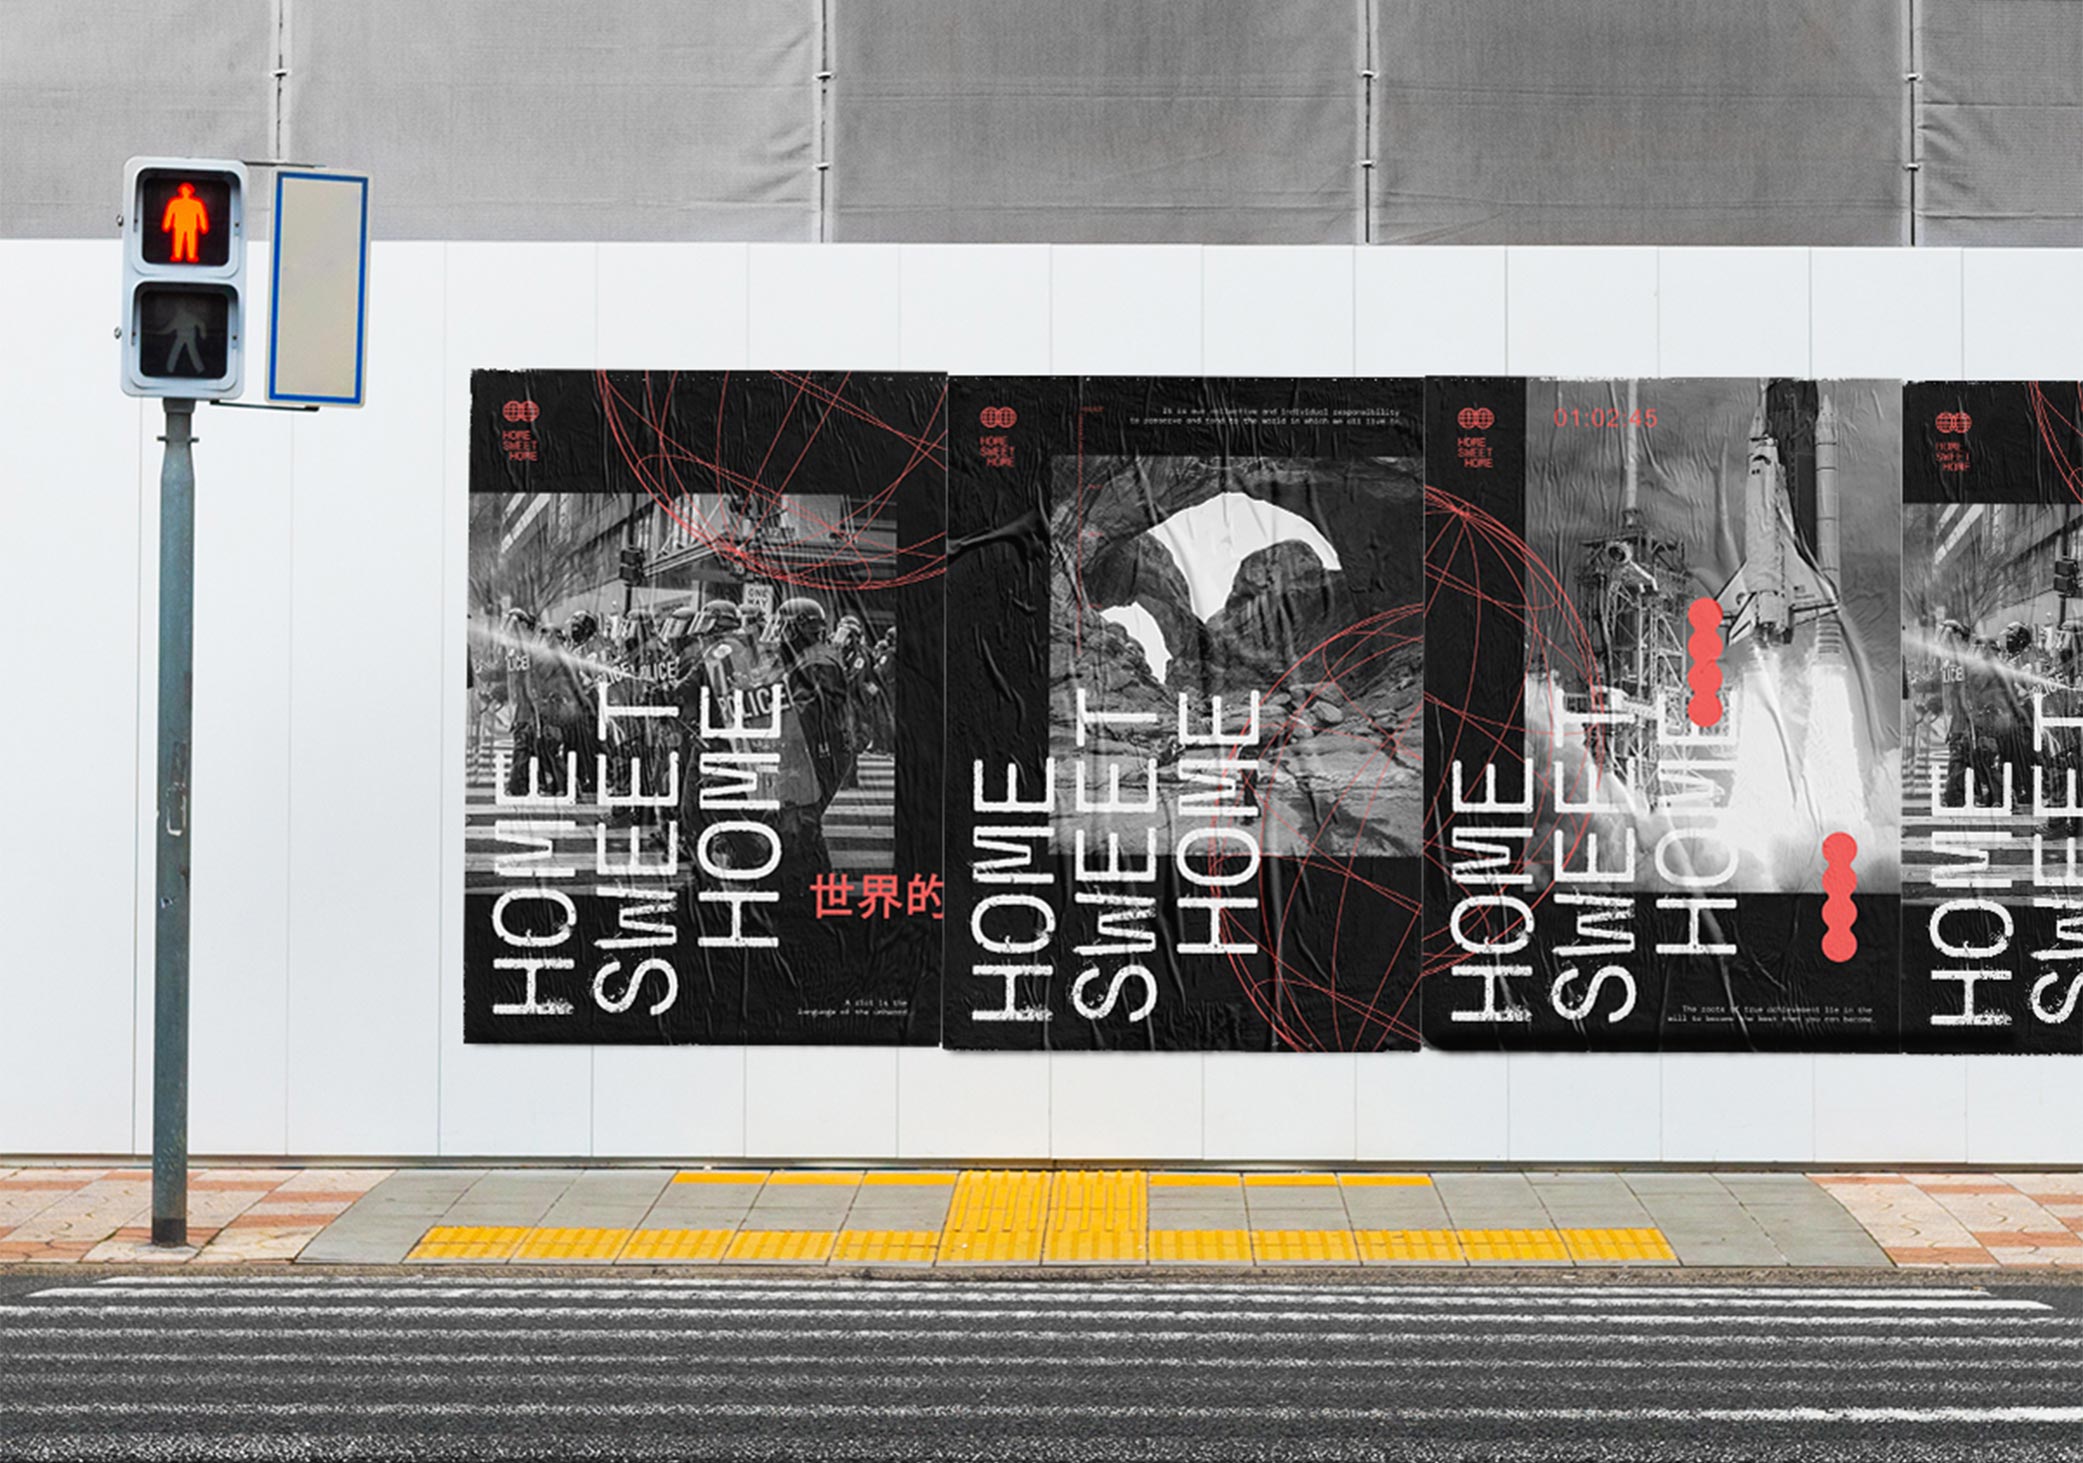 Urban street poster design shown in situ using typography and mono graphics